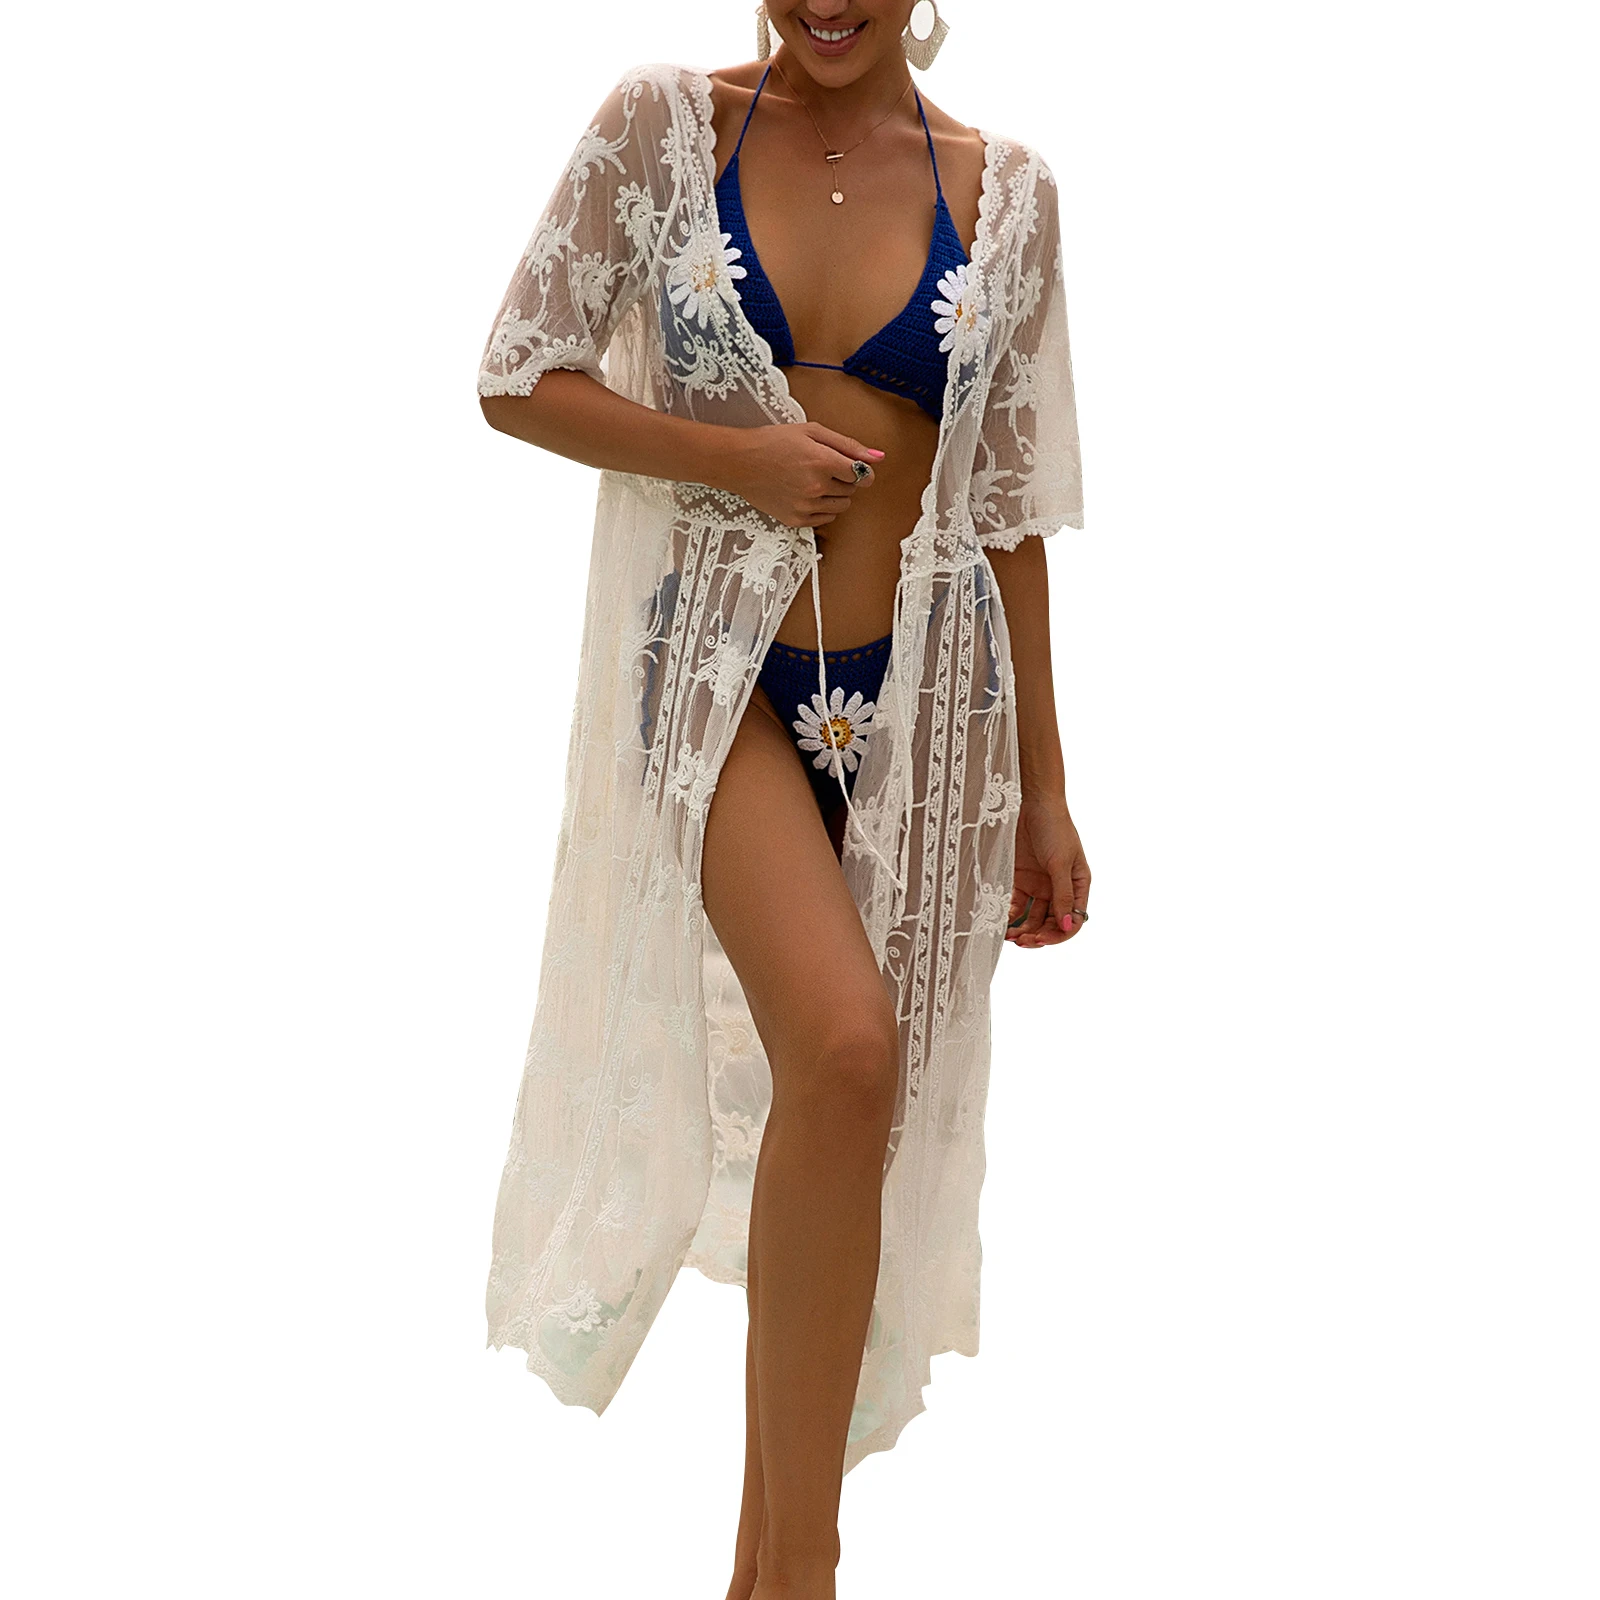 Female Bikini Cover Ups Lace Floral Deep V-Neck Short Sleeve Hollow Out Beach Dress Smock Coat for Women Swimwears Beach Robe Cover Up Cover-Ups